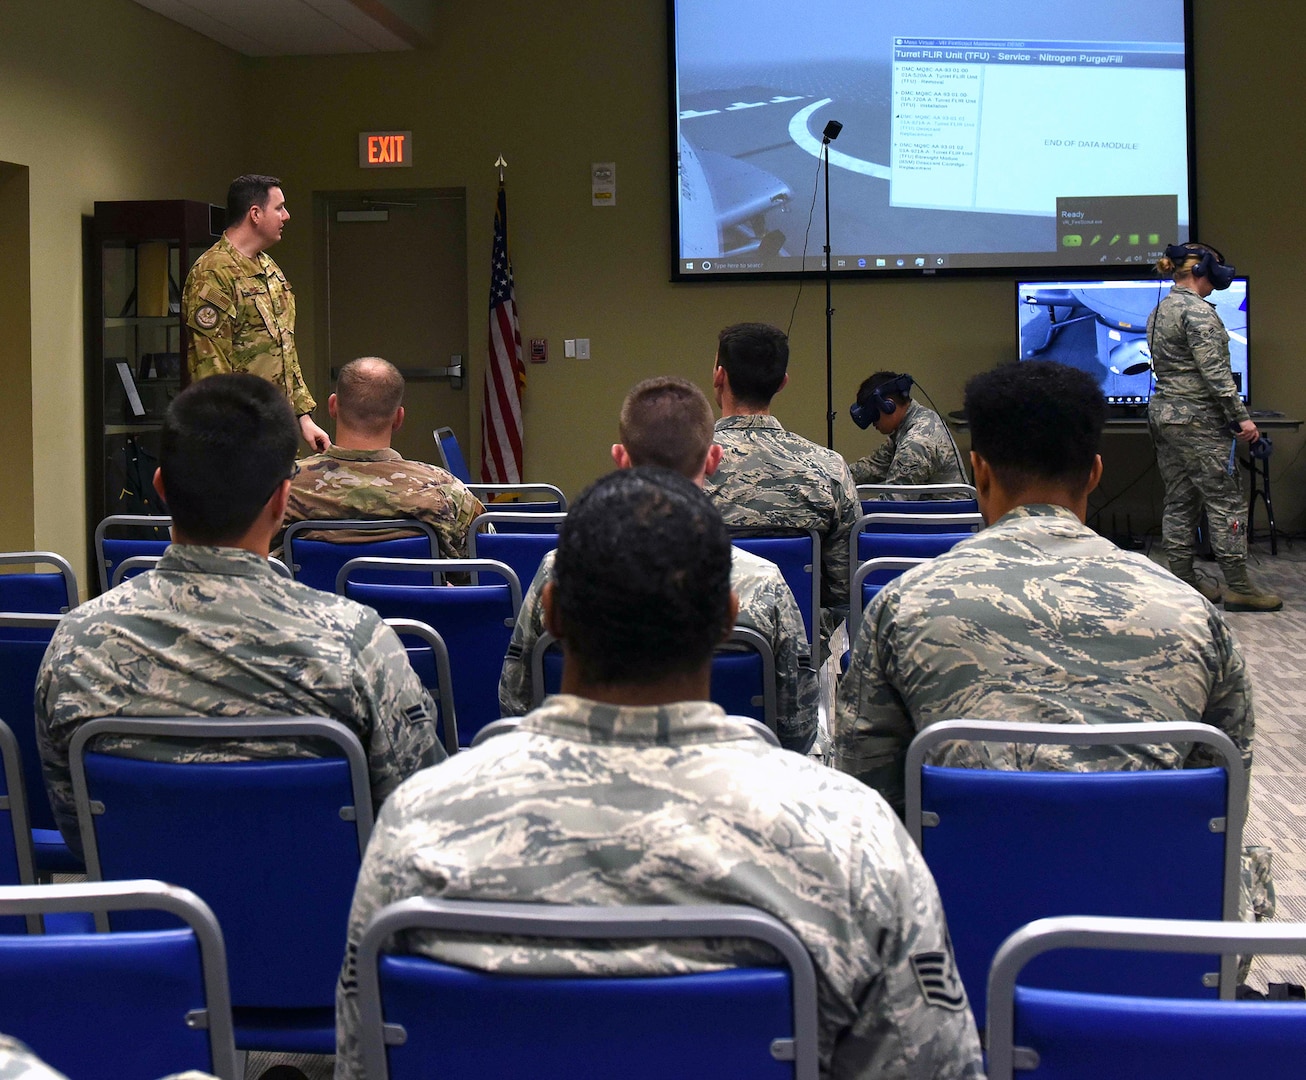 Master Sgt. Justin Nissen, 344th Training Squadron instructor from Joint Base San Antonio-Lackland, briefs during a virtual reality demonstration May 2, 2019, at Little Rock Air Force Base, Arkansas. Nissen and other 344th TRS members visited Little Rock Air Force Base to showcase the Integrated Technology Platform, an initiative to train Airmen using virtual reality.